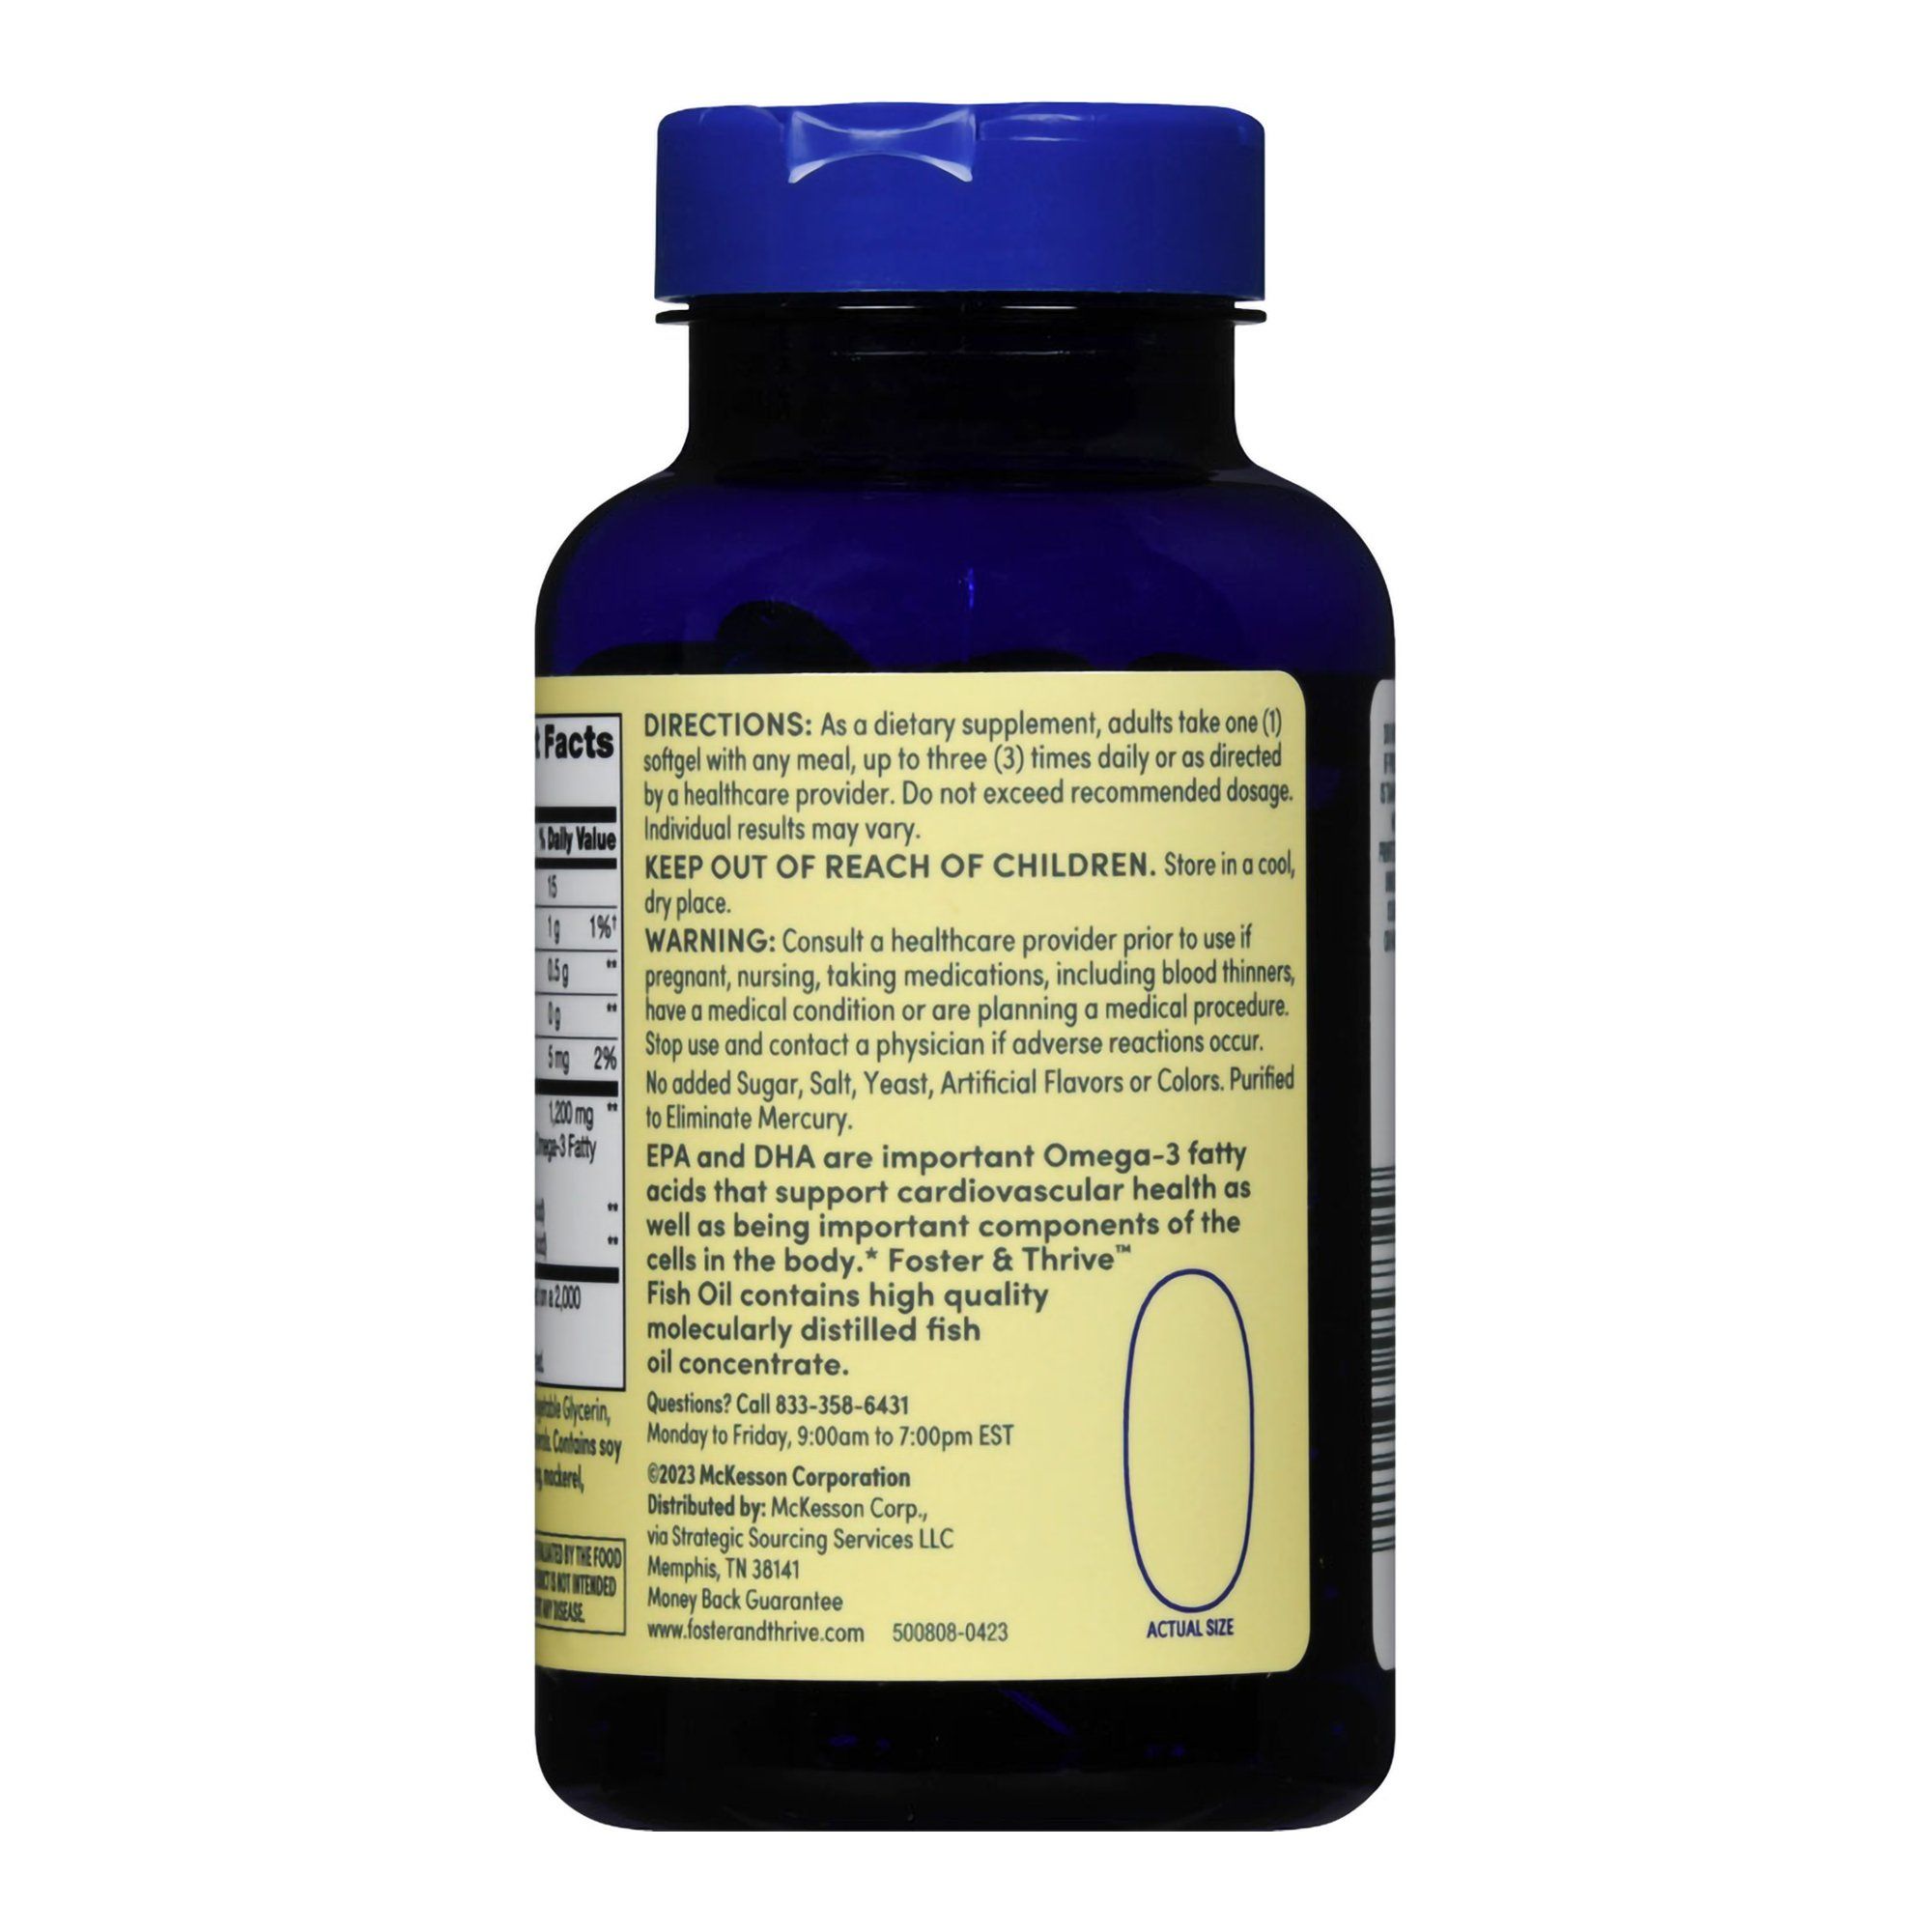 Foster & Thrive Omega 3 Fish Oil Softgels, 1200 mg - 100 ct